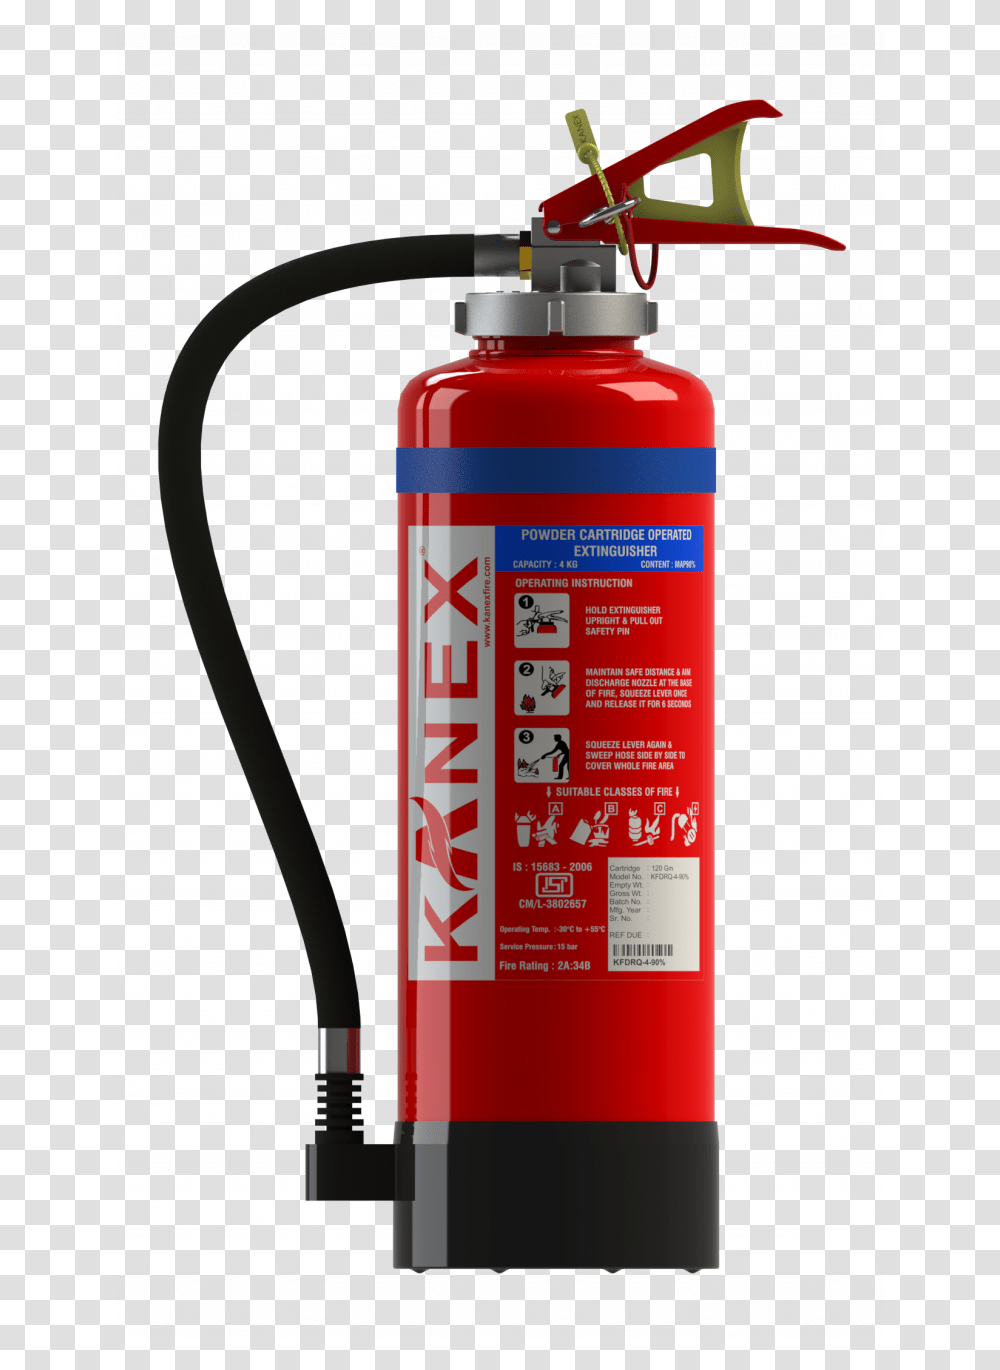 Grab And Download Extinguisher Icon Fire Extinguisher, Bottle, Machine, Gas Pump, Spray Can Transparent Png